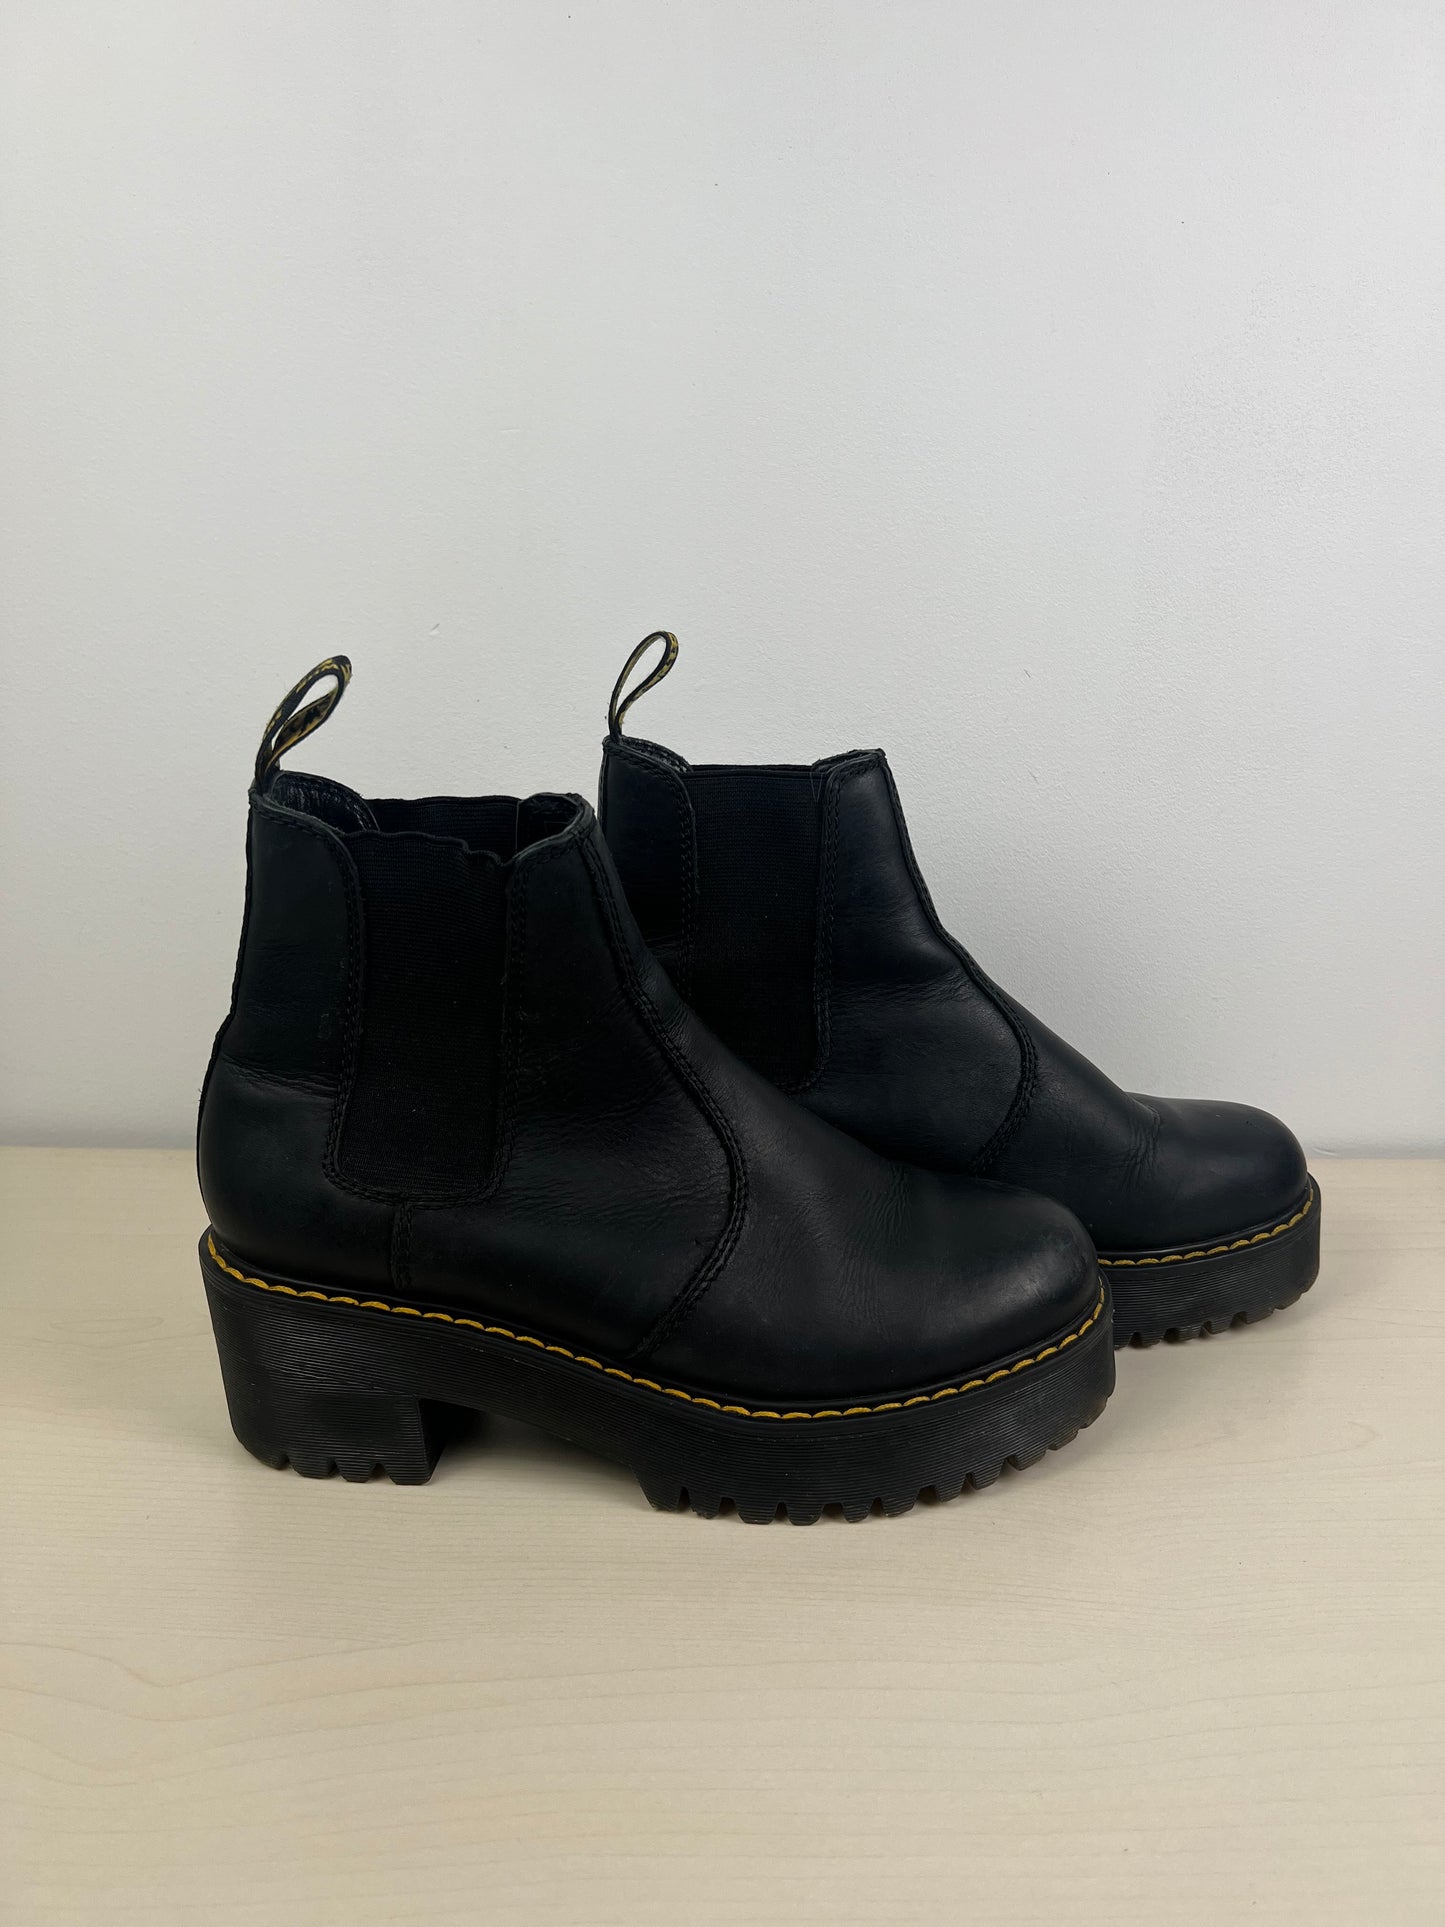 Boots Leather By Dr Martens  Size: 8